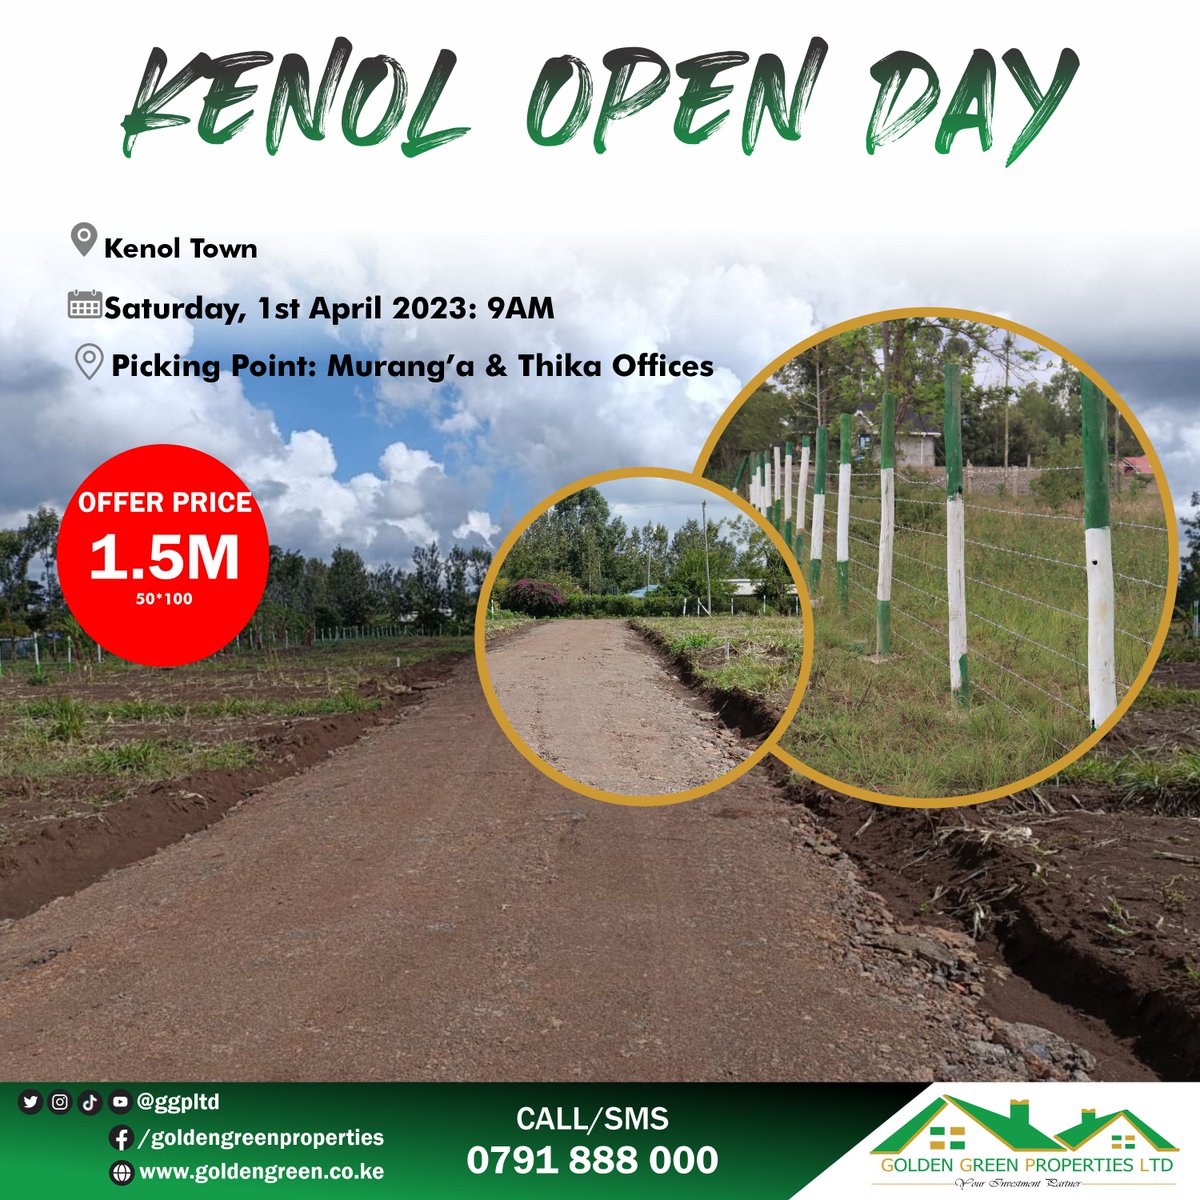 Join us on April 1st, 2023 for the open day of Golden Estate Phase 2 in Kenol Town! Explore our available plots and learn more about our real estate services. Don’t miss out on this exciting opportunity!

Call/WhatsApp: 0791 888 000
#plotsforsale
#affordableplots